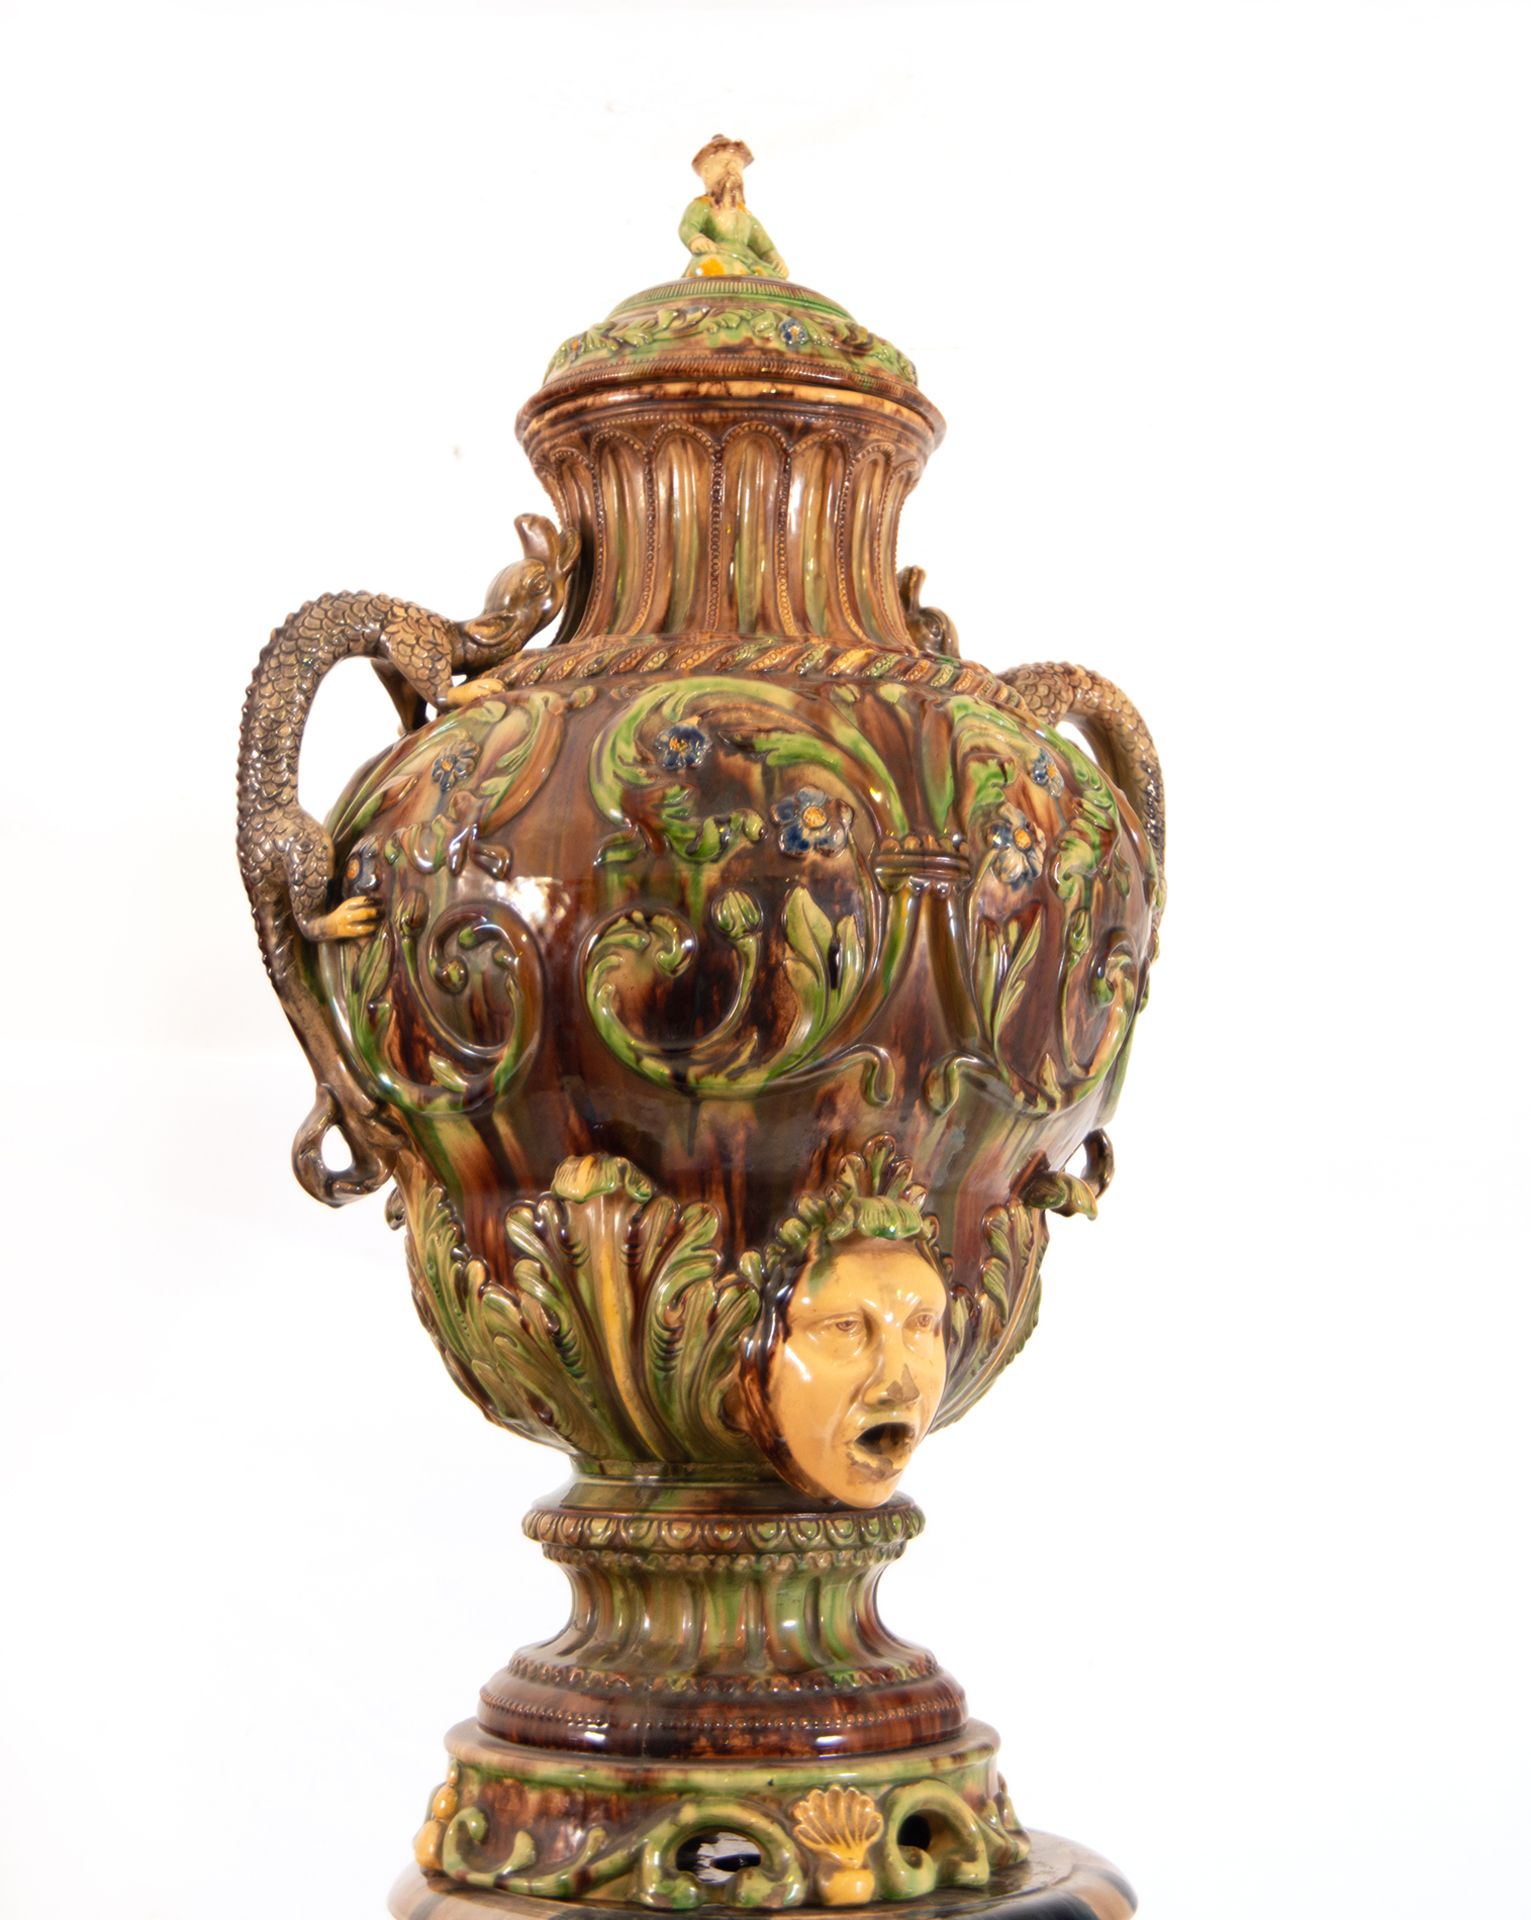 Ewer in enameled stoneware in the Art Nouveau style, French or Italian school of the 19th - 20th cen - Image 7 of 11